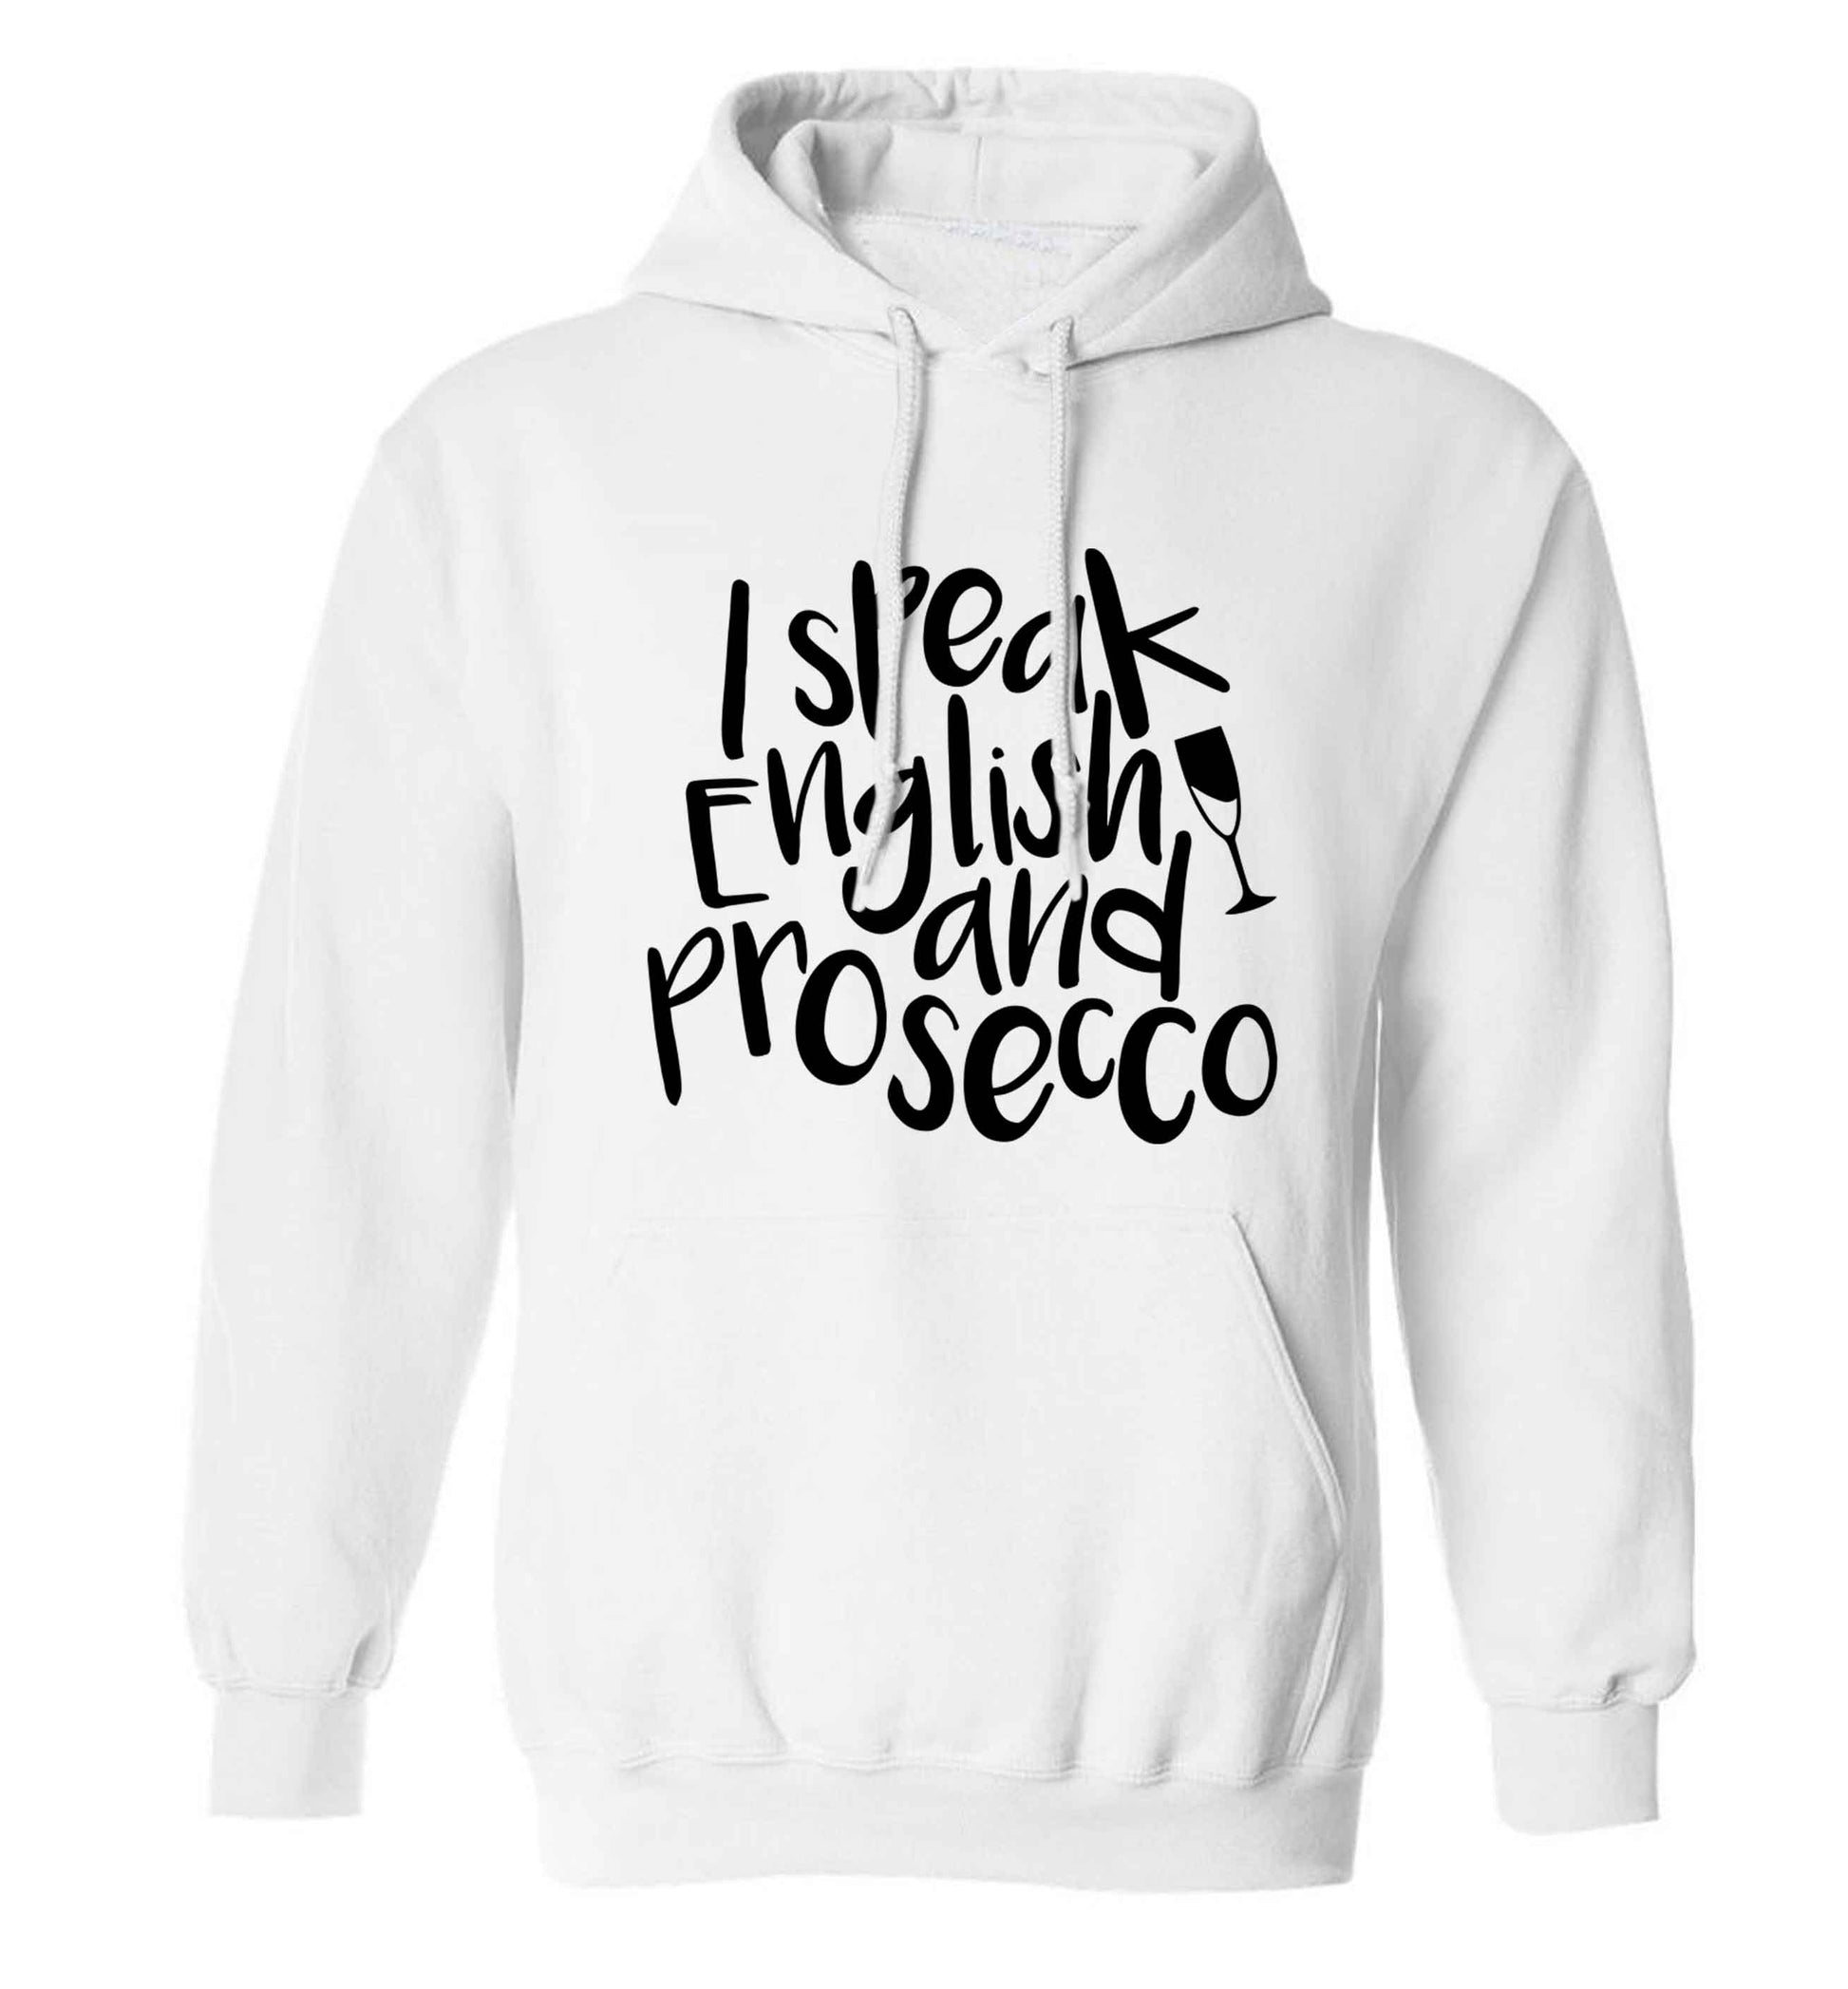 I speak English and prosecco adults unisex white hoodie 2XL